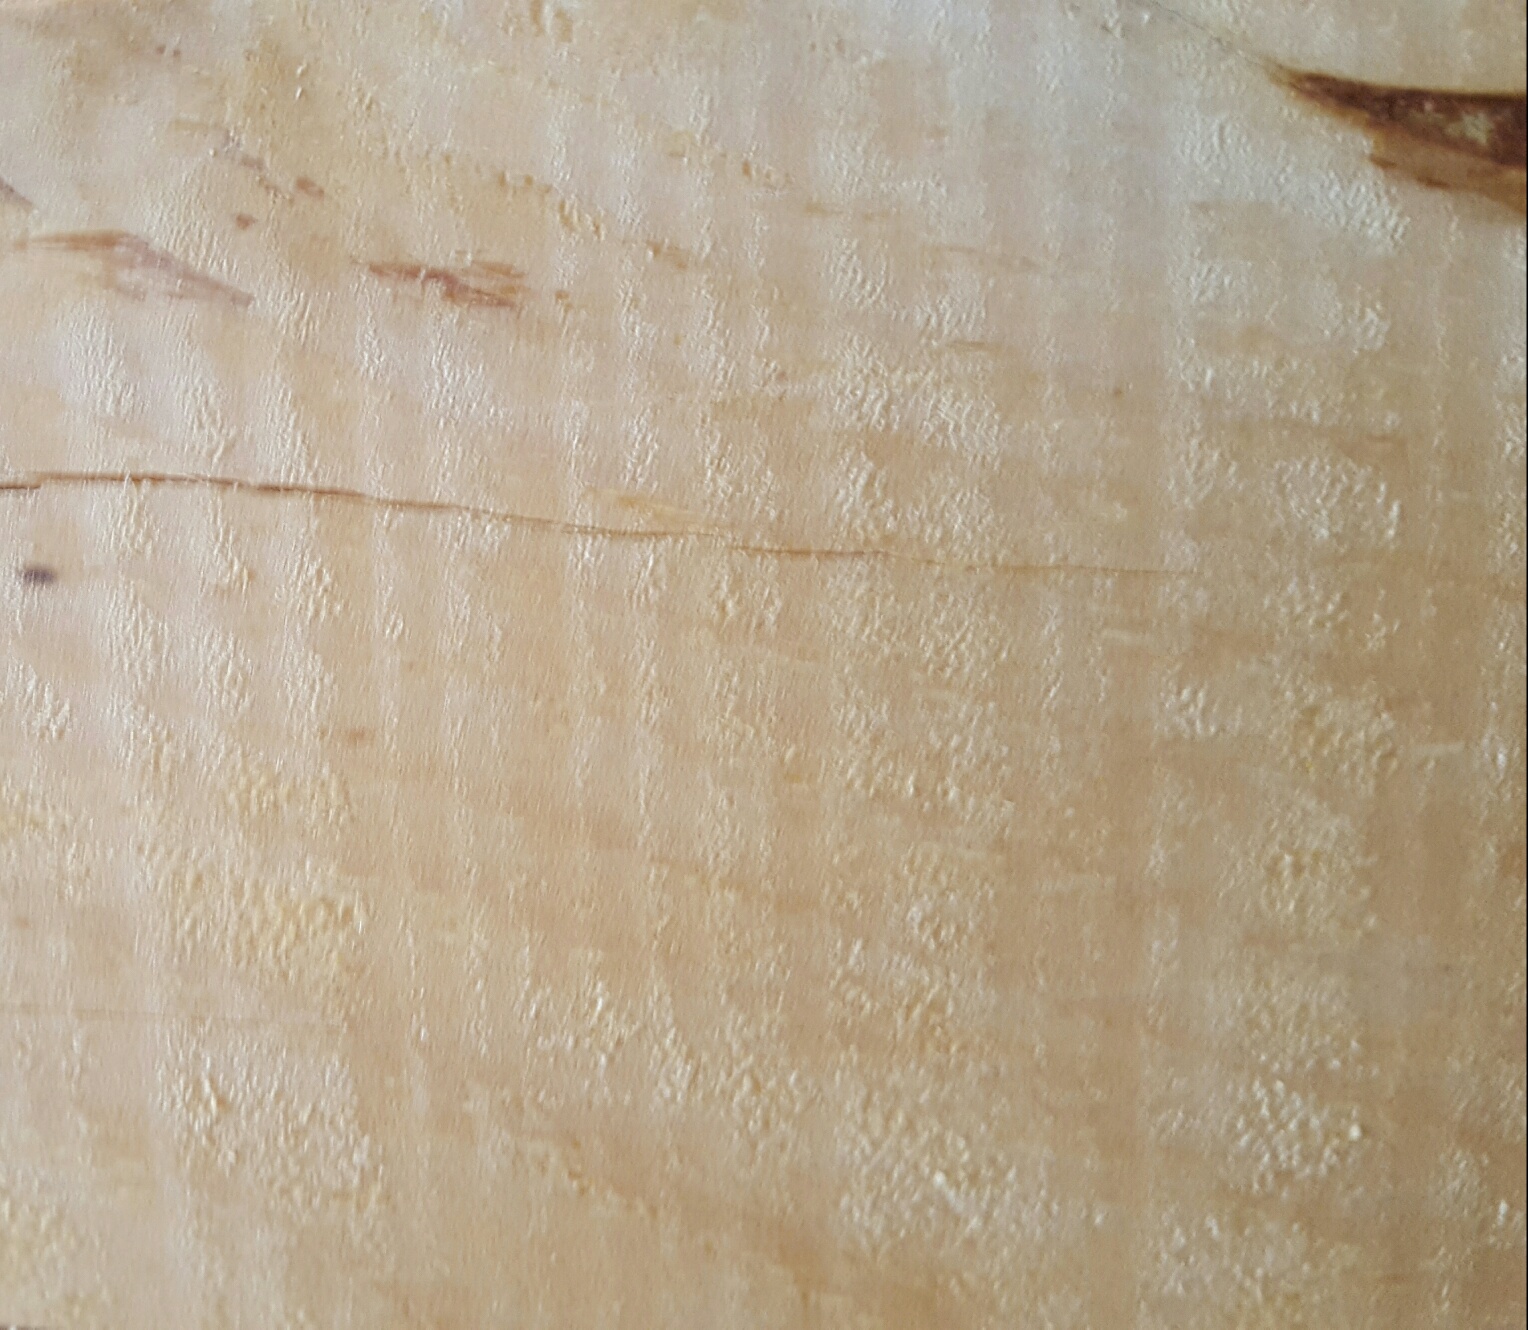 snipe marks and very rough texture